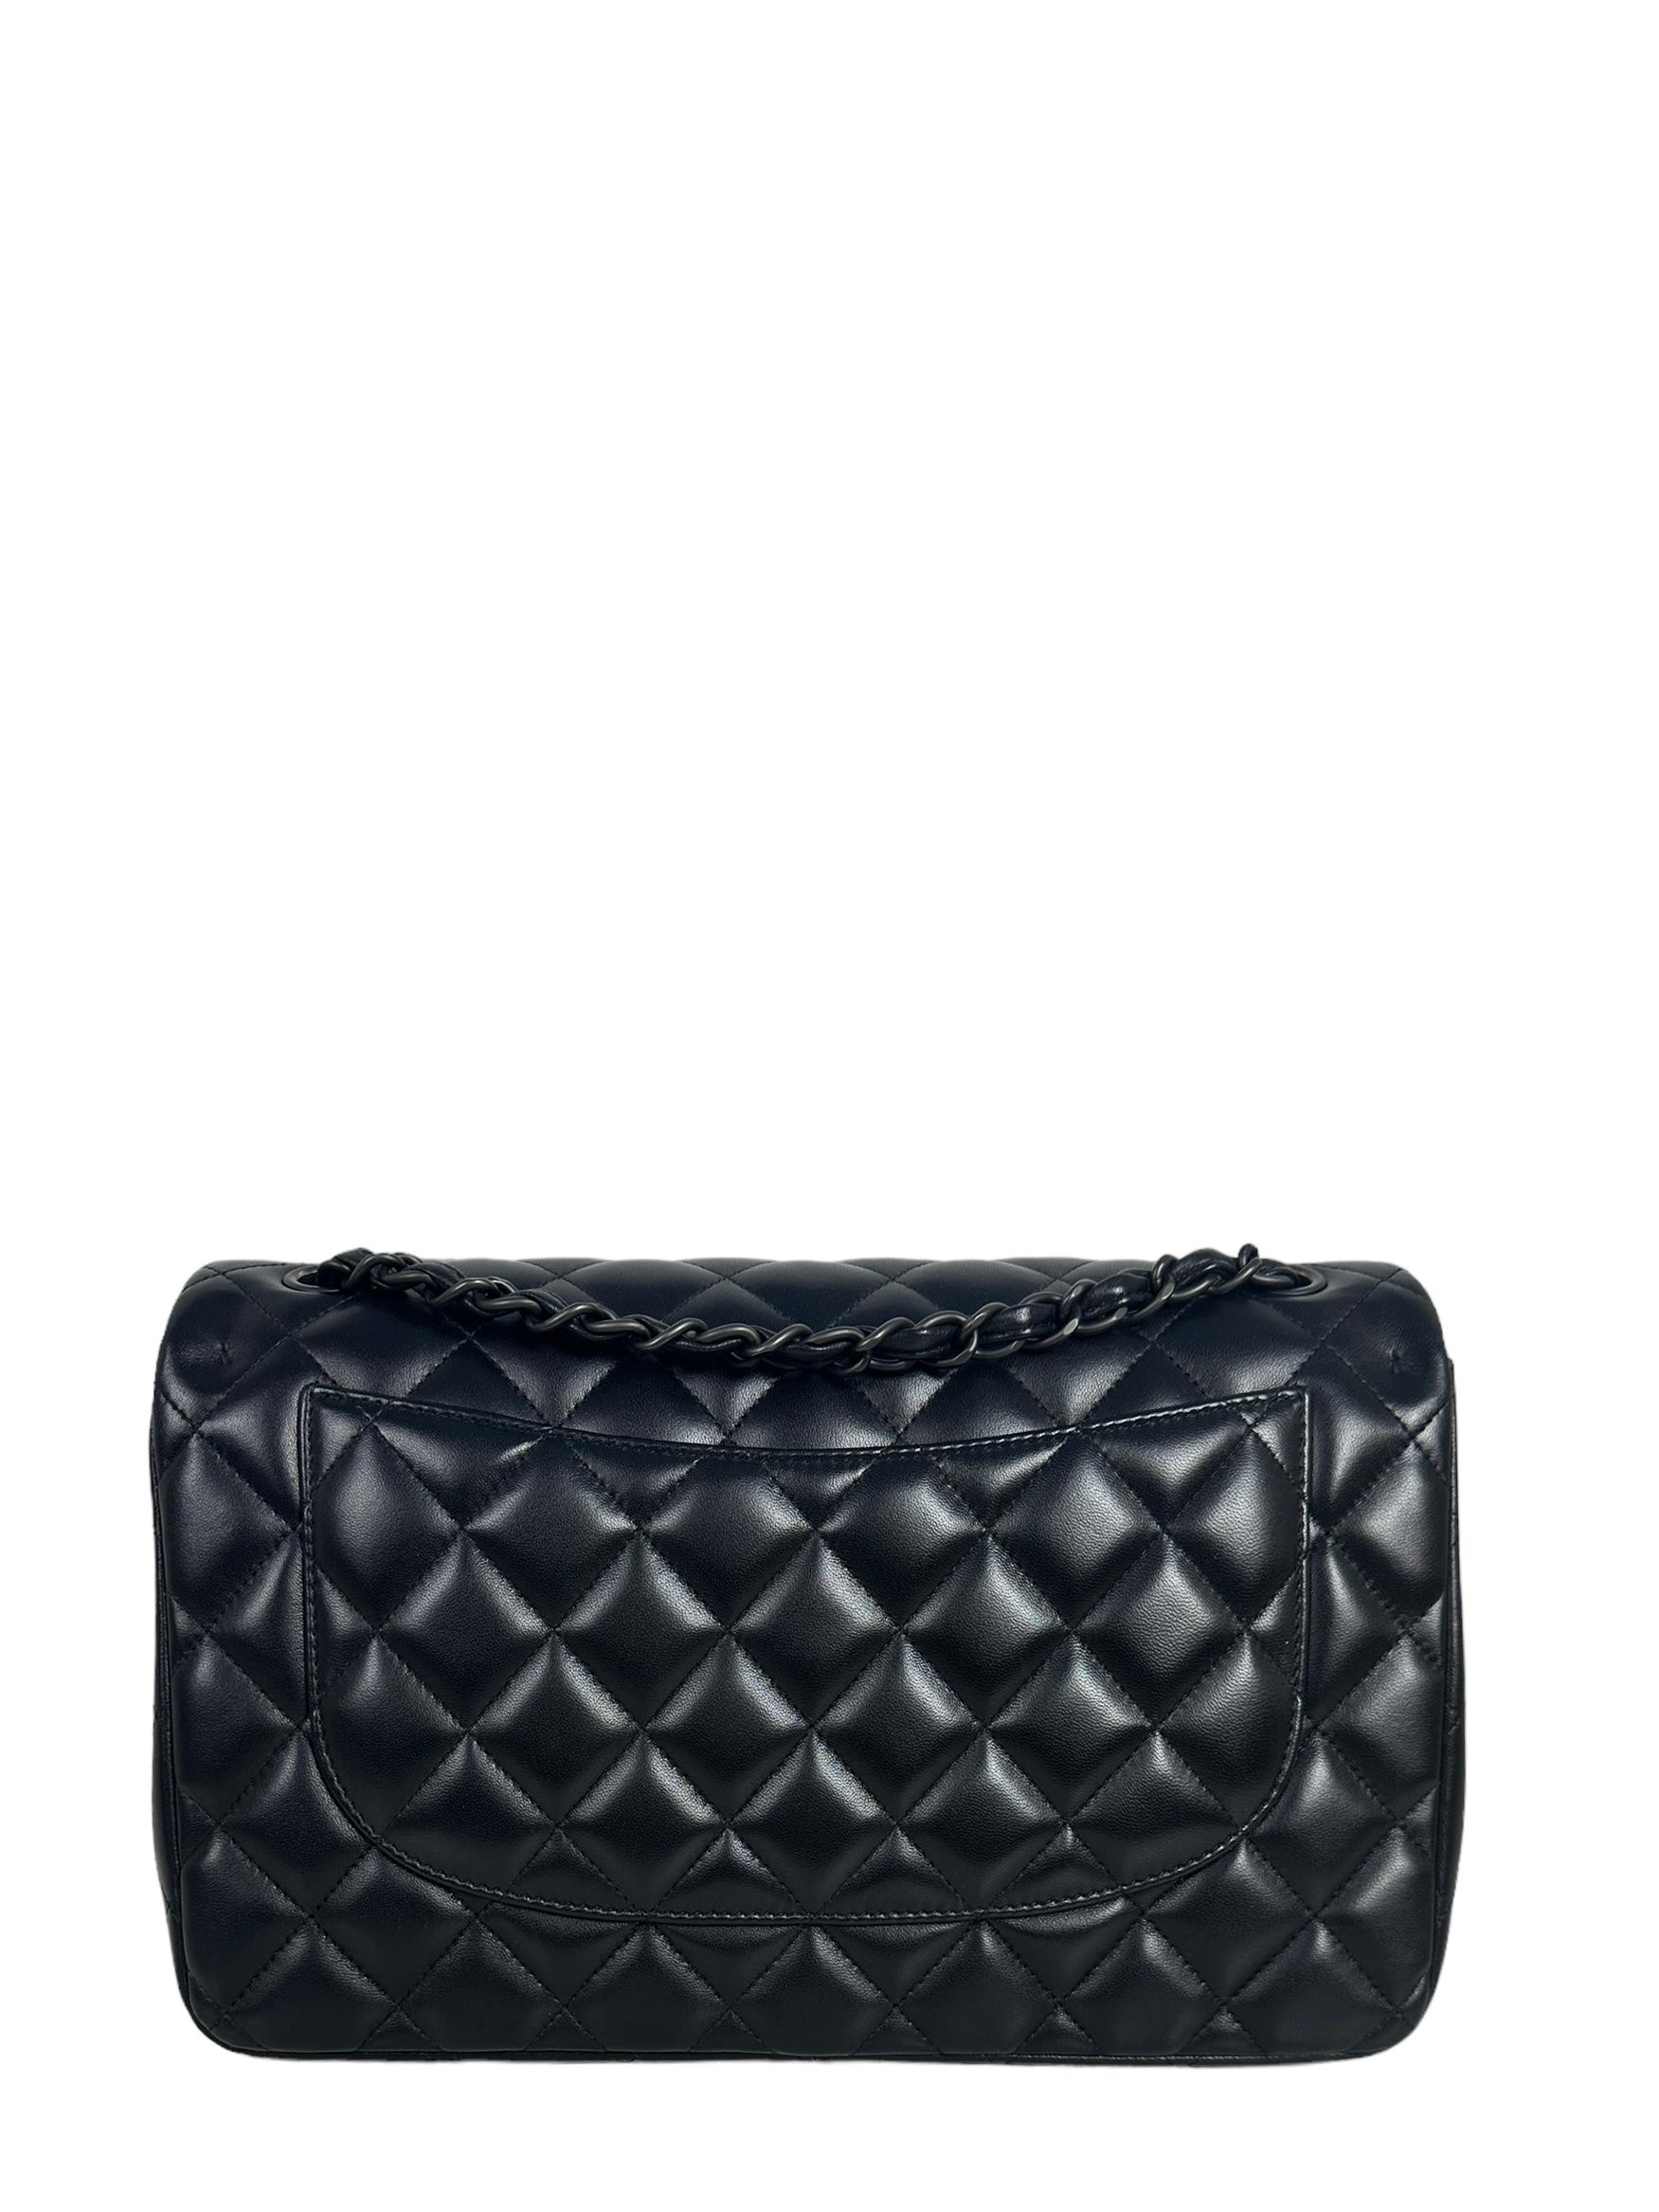 Chanel SO Black Lambskin Leather Quilted Classic Double Flap Jumbo Bag 

Made In: Italy
Year of Production: 2013
Color: Black
Hardware: Black
Materials: Lambskin Leather
Lining: Black leather
Closure/Opening: Top flap with CC turnlock
Exterior